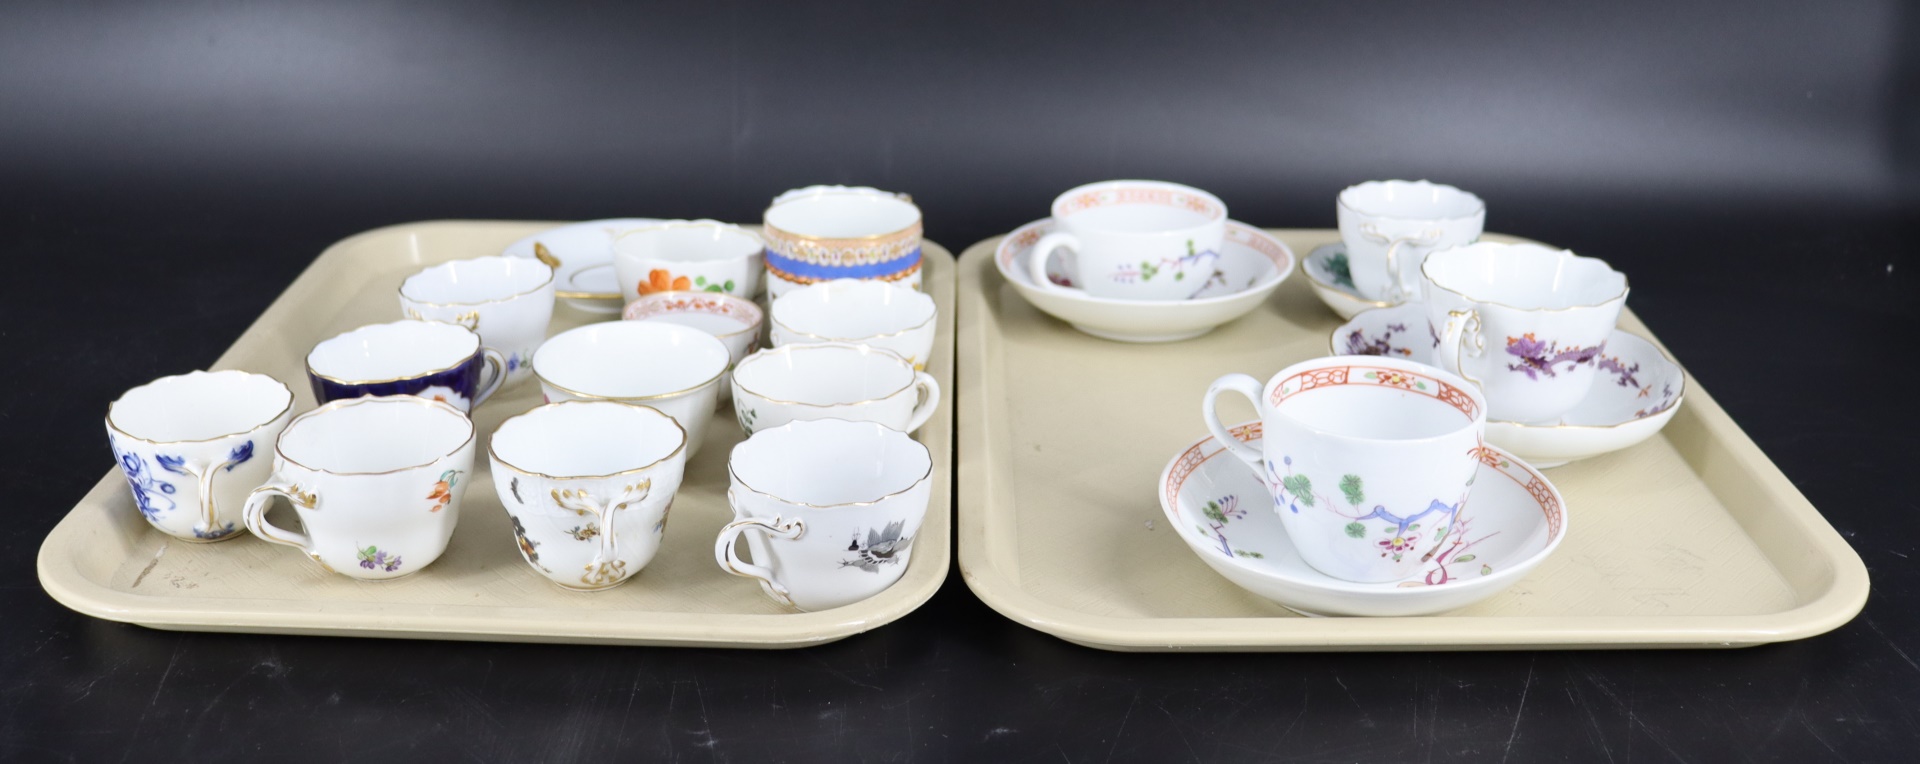 GROUPING OF MEISSEN CUPS SAUCERS  3b8873